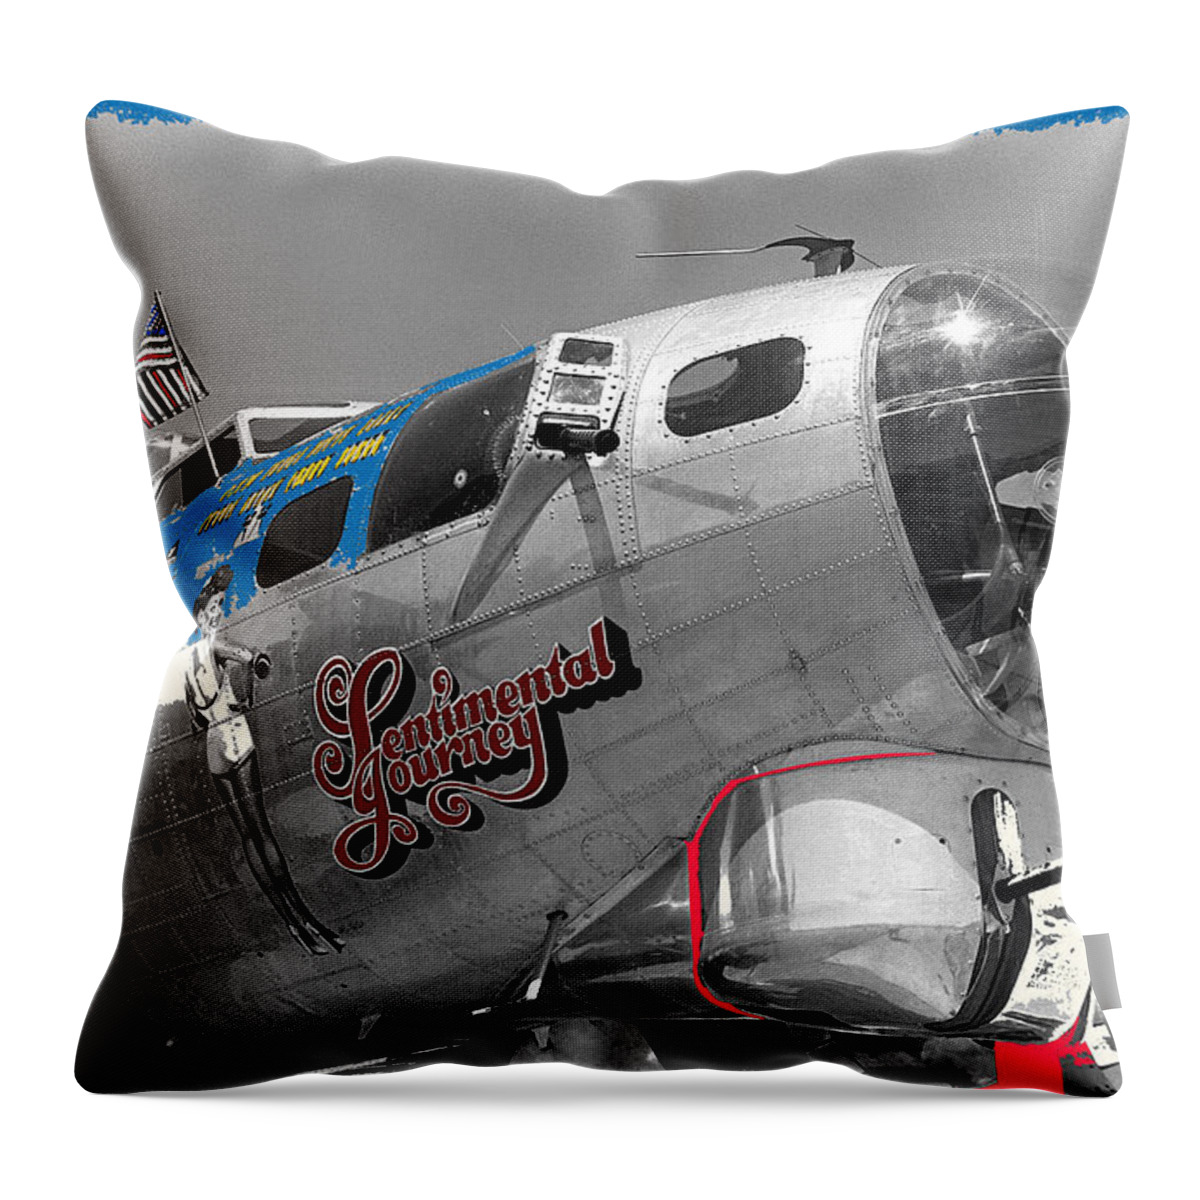 B-17g Flying Fortress Sentimental Journey 2 Avra Valley Arizona 1991 Color Added 2008 Throw Pillow featuring the photograph B-17G Flying Fortress Sentimental Journey 2 Avra Valley Arizona 1991 color added 2008 by David Lee Guss